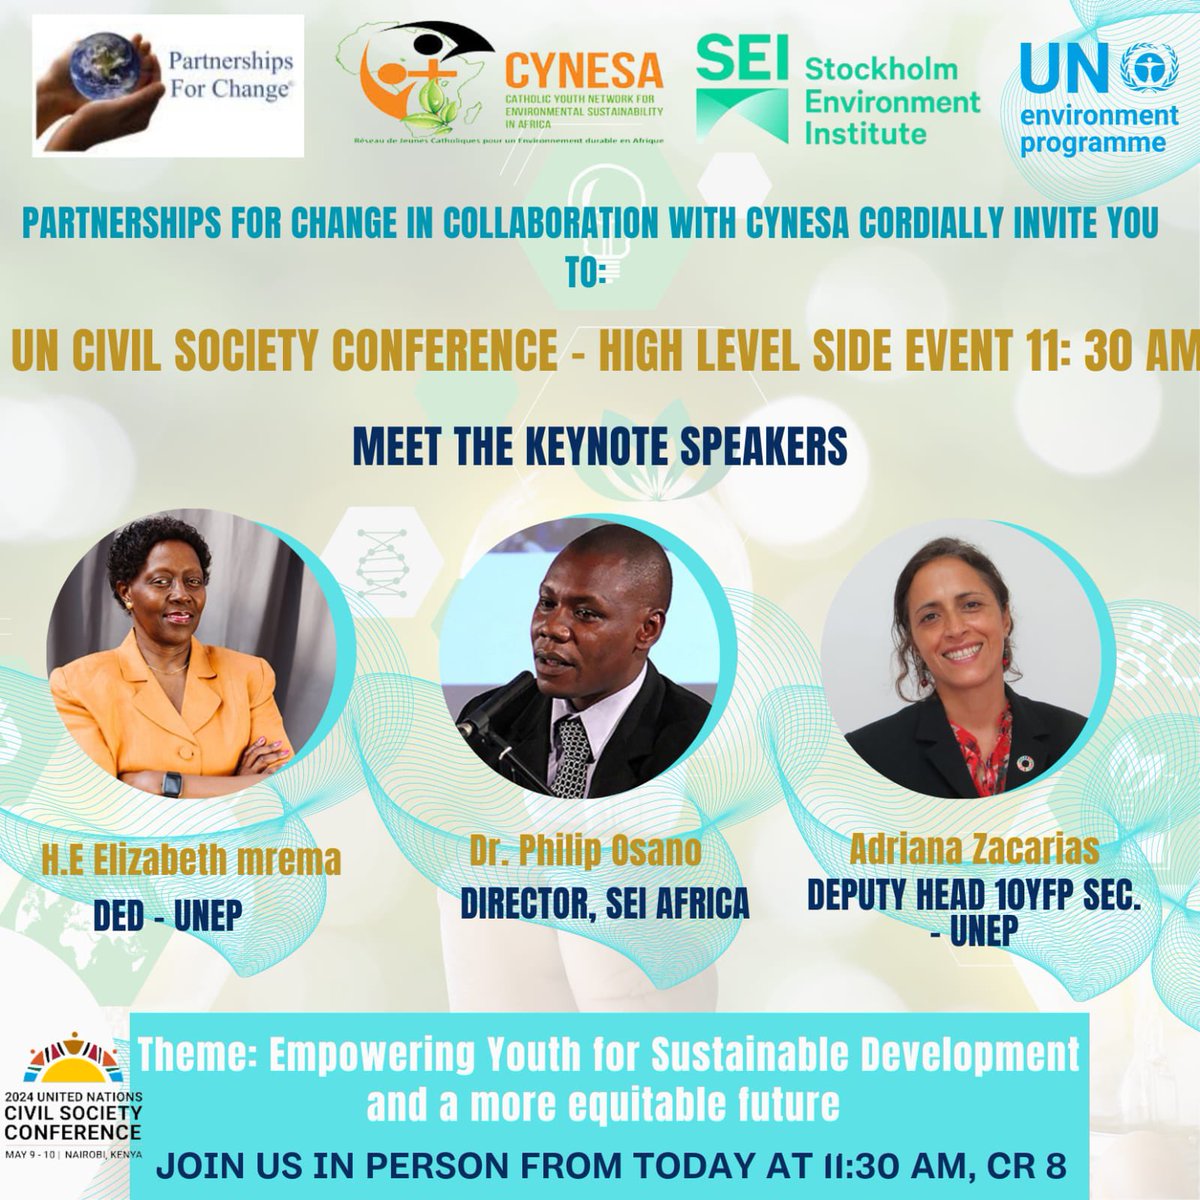 Am excited that our workshop today provides an incredible space for both technical and intergenerational discussion. Our keynote speakers @mremae ,@PMOsano and @Adriana_GO4SDGs are amazing youth champions joining session. @CYNESA @davidnmunene @LindaMakau @lizwathuti @UNEP